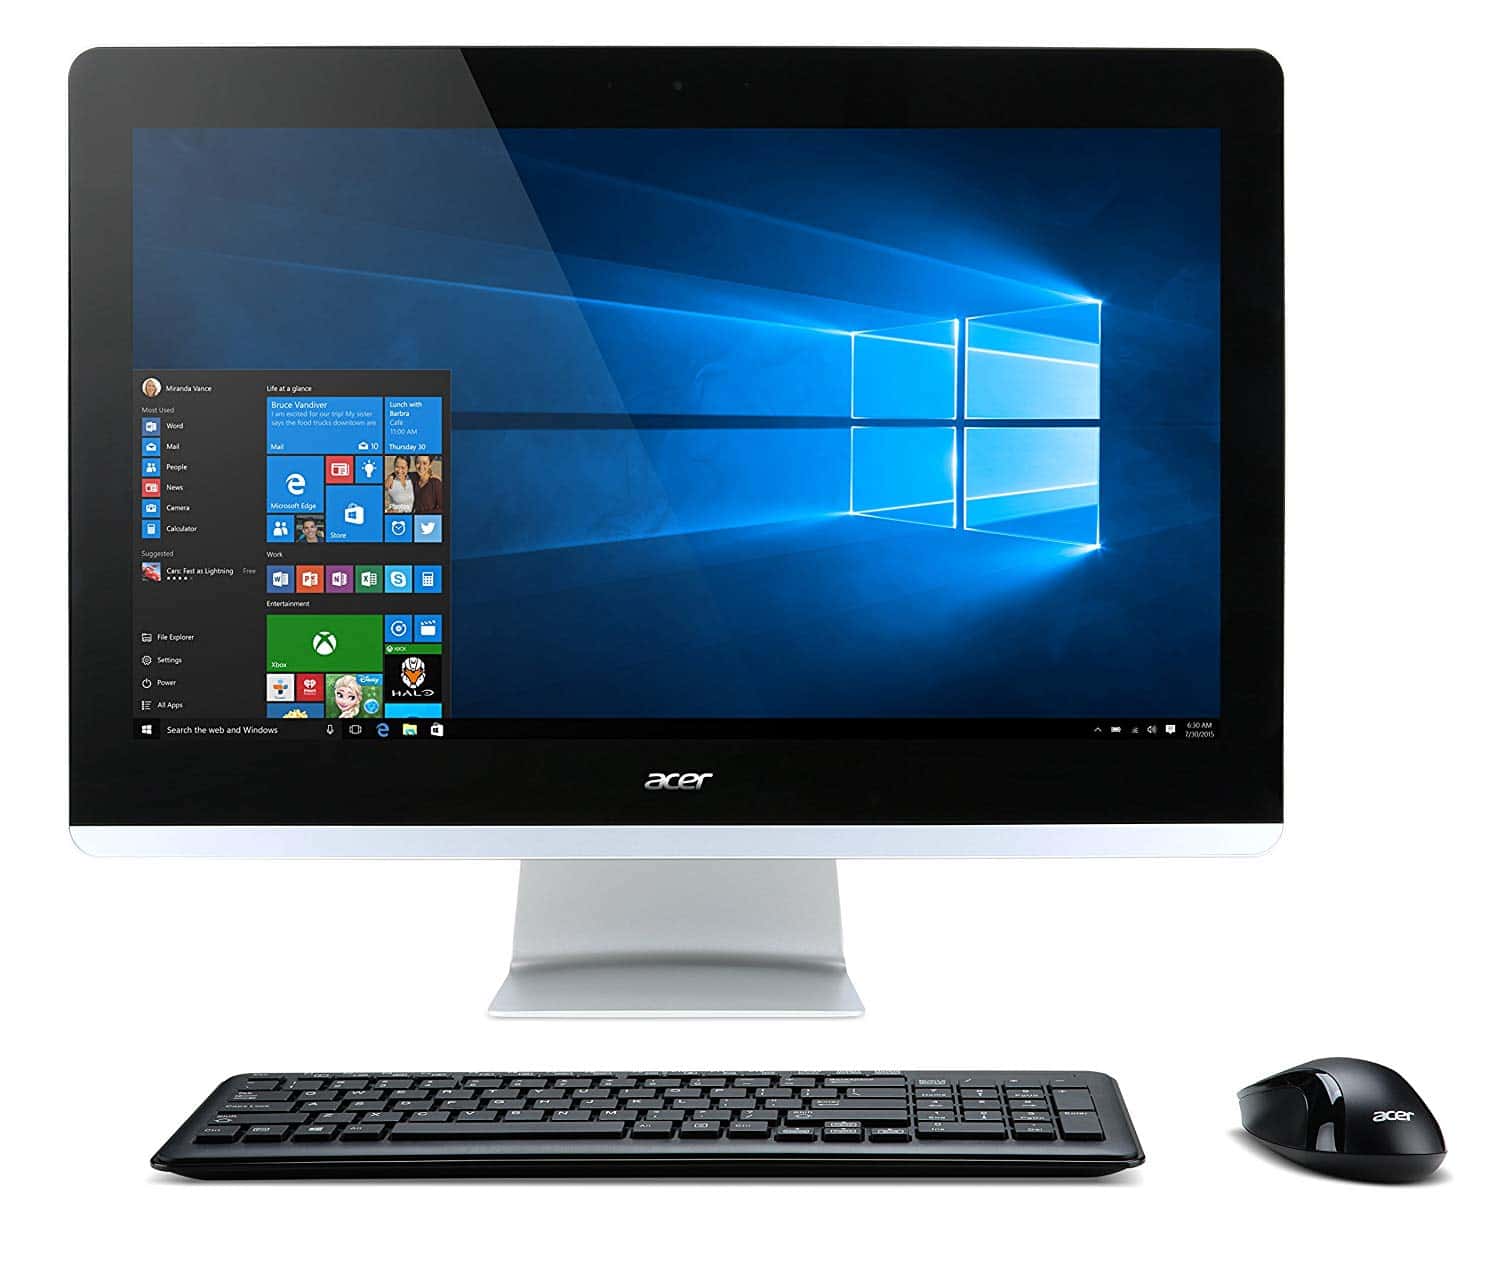 Acer Aspire "width =" 1500 "height =" 1284 "srcset =" https://justcreative.com/wp-content/uploads/2018/10/acer-aspire.jpg 1500w, https://justcreative.com/wp -content / uploads / 2018/10 / acer-aspire-467x400.jpg 467w, https://justcreative.com/wp-content/uploads/2018/10/acer-aspire-768x657.jpg 768w, https: // justcreative .com / wp-content / uploads / 2018/10 / acer-aspire-1024x877.jpg 1024w "tailles =" (largeur maximale: 1500px) 100vw, 1500px